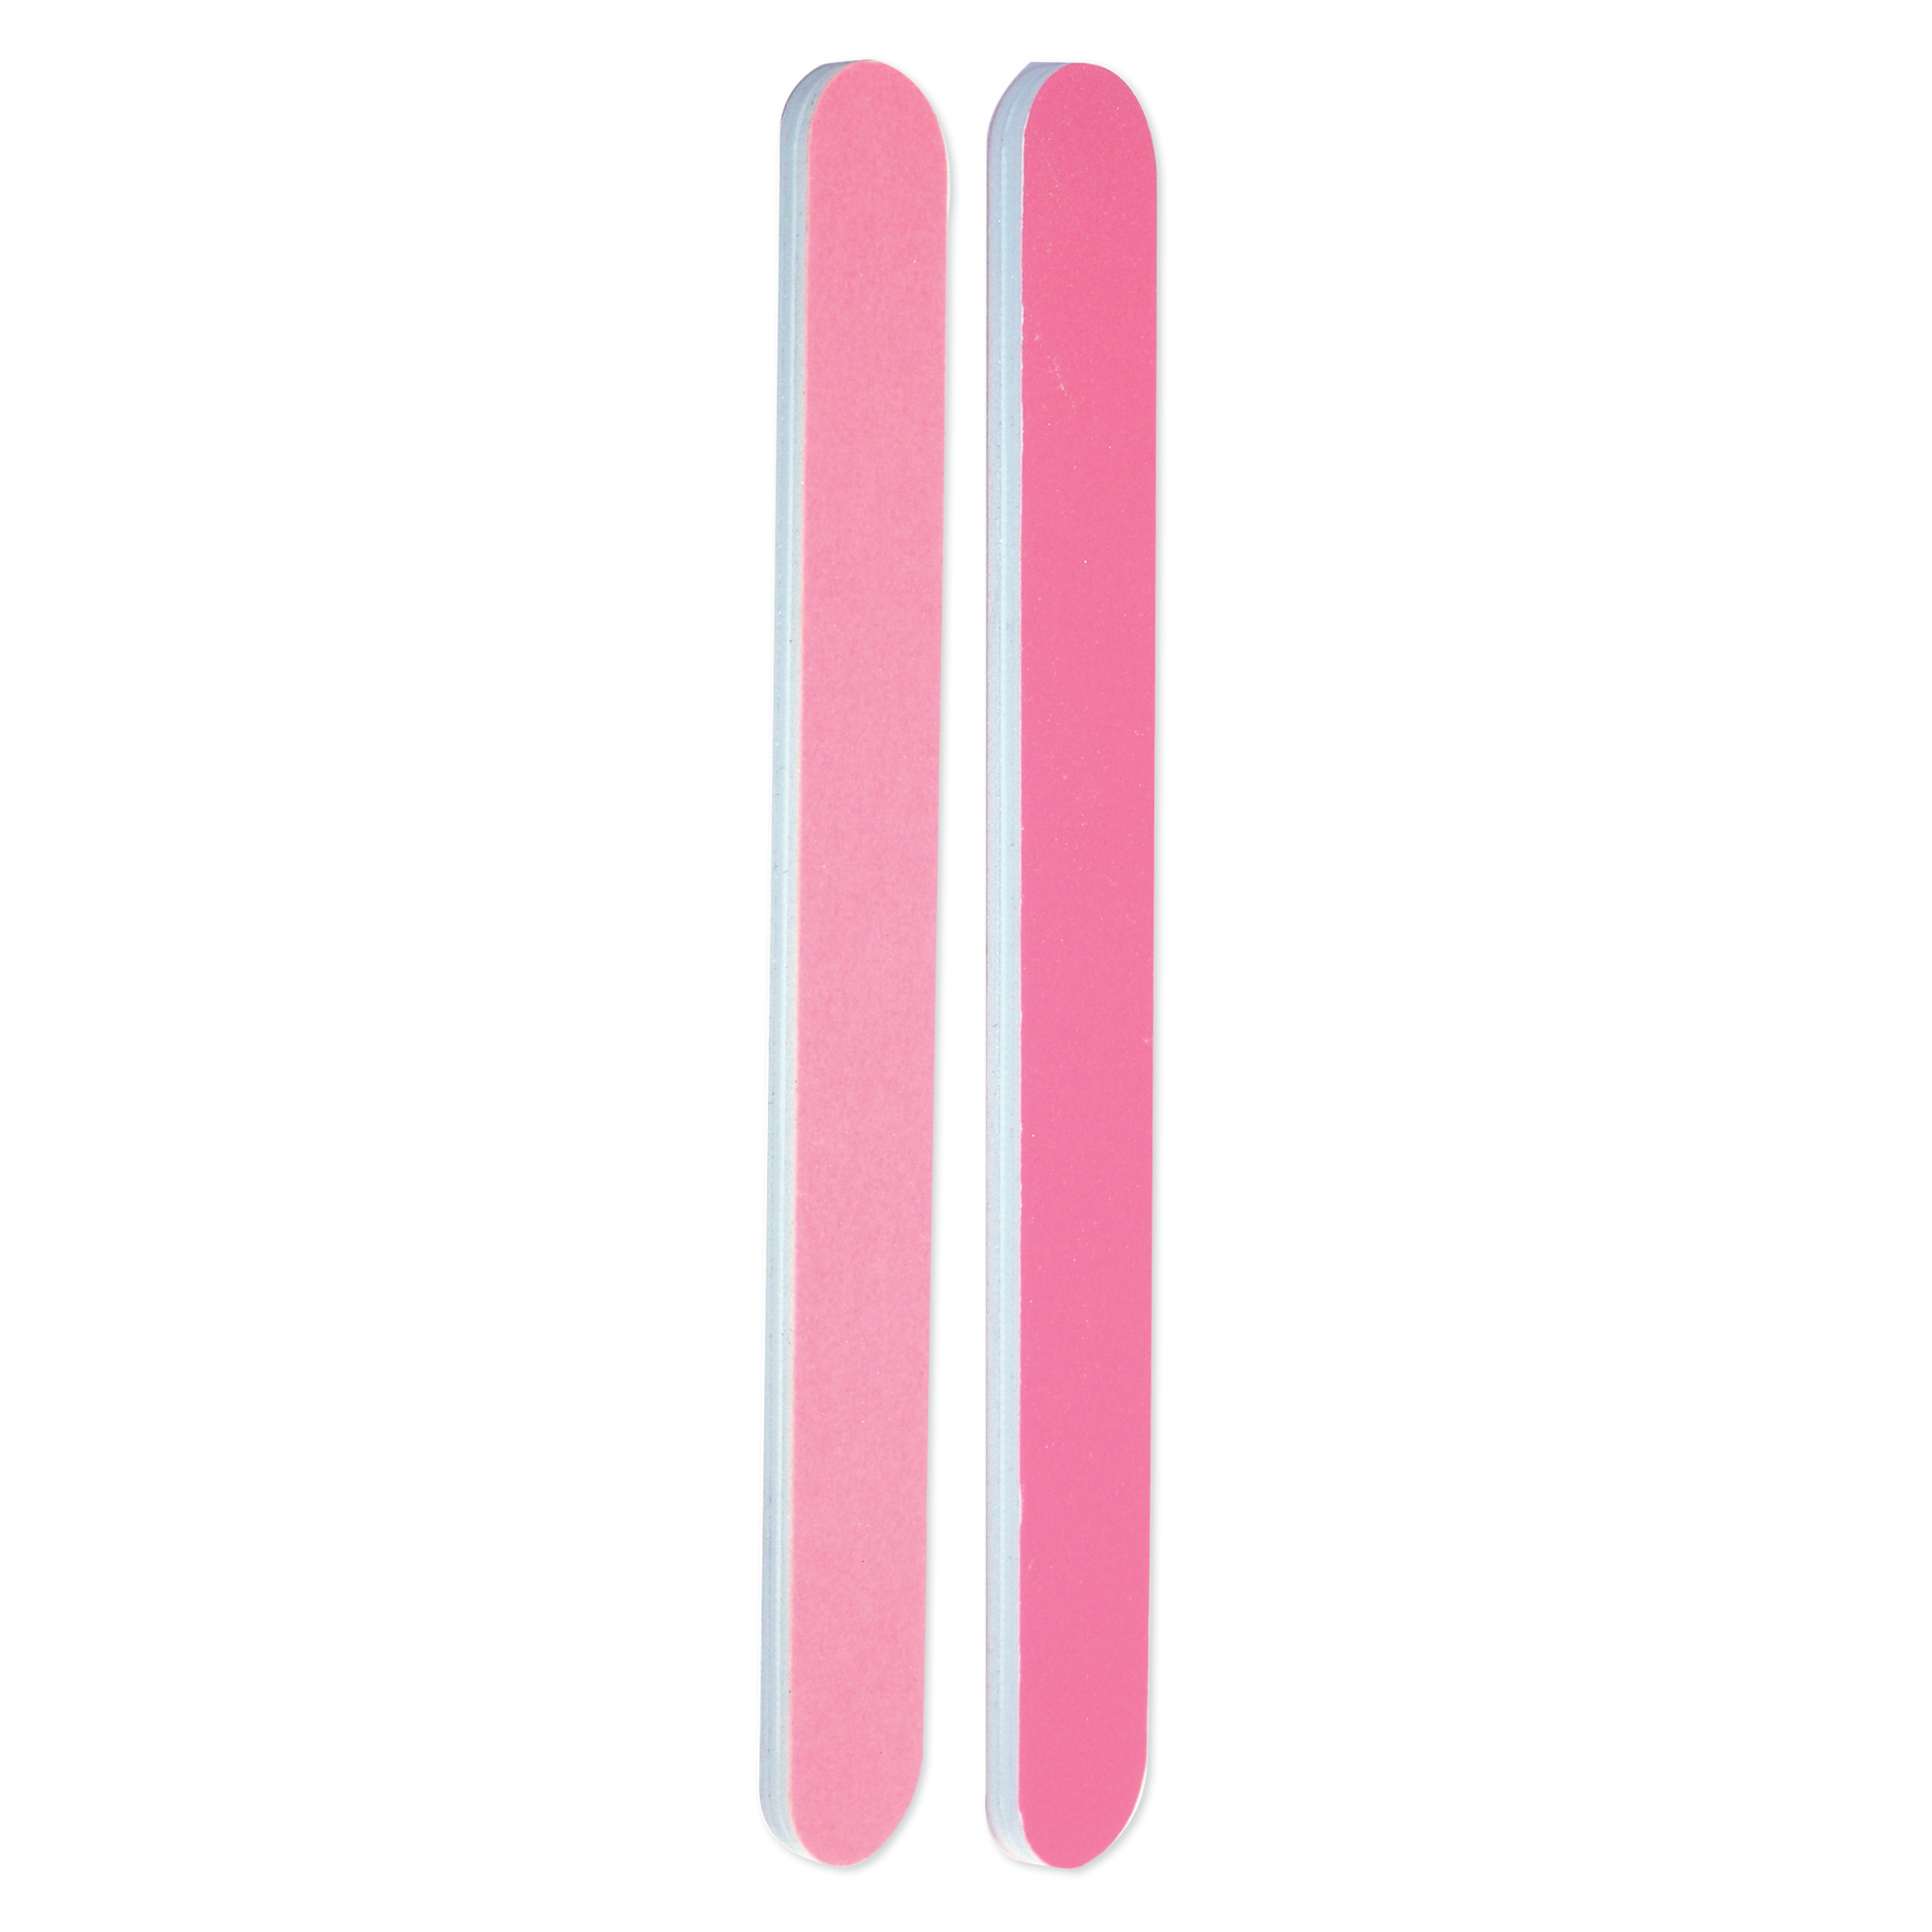 Nail File, Washable - 180/240 Grit